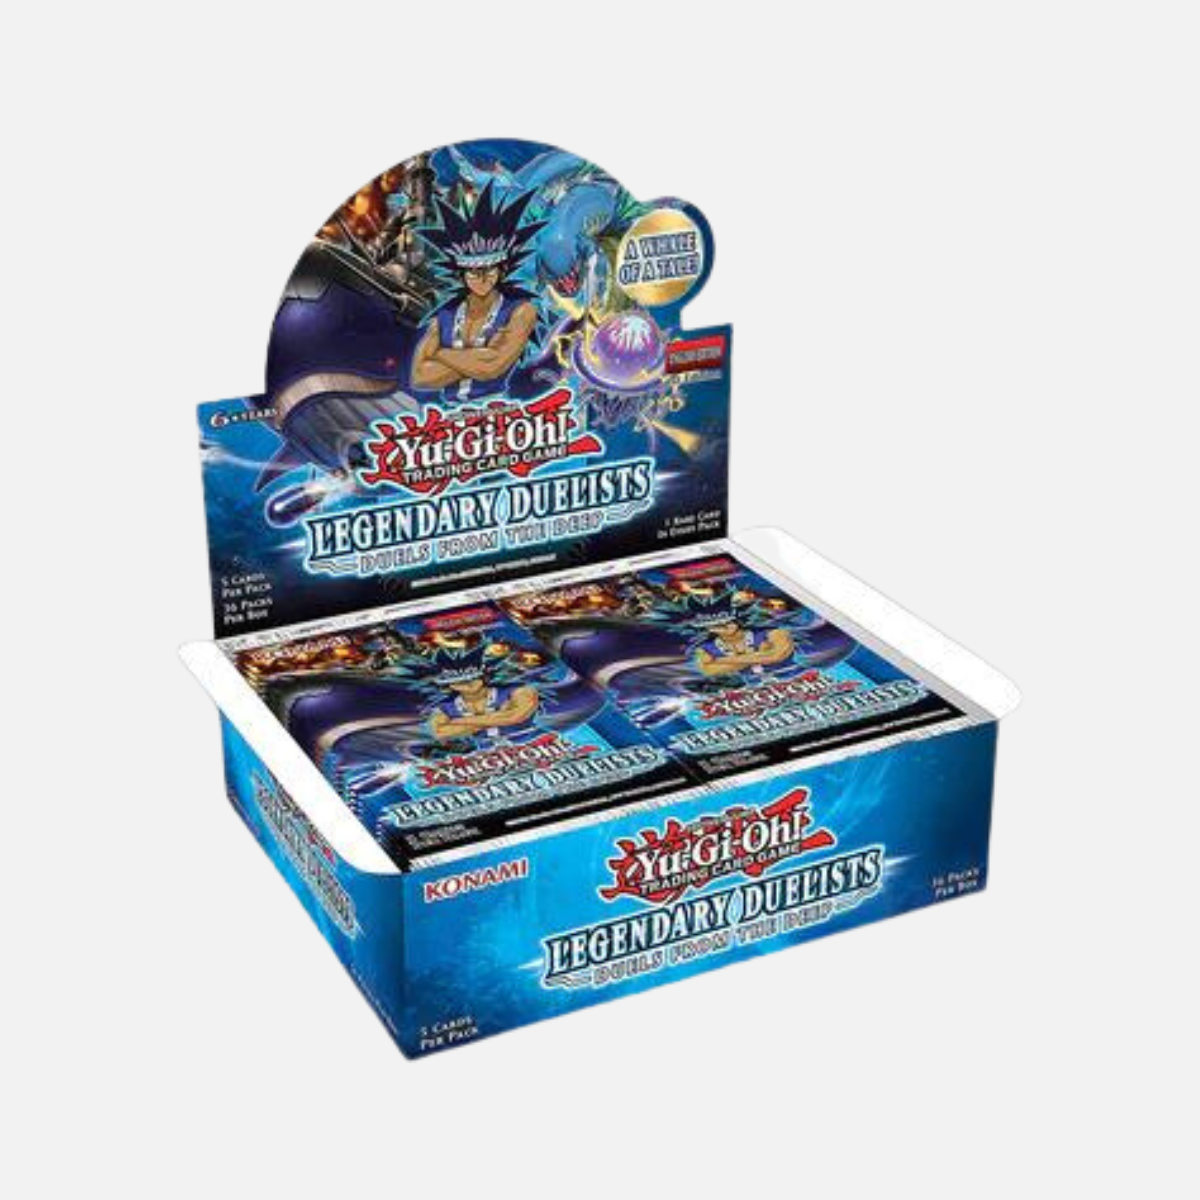 Yi-Gi-Oh! Legendary Duelists: Duels from the Deep Booster Box